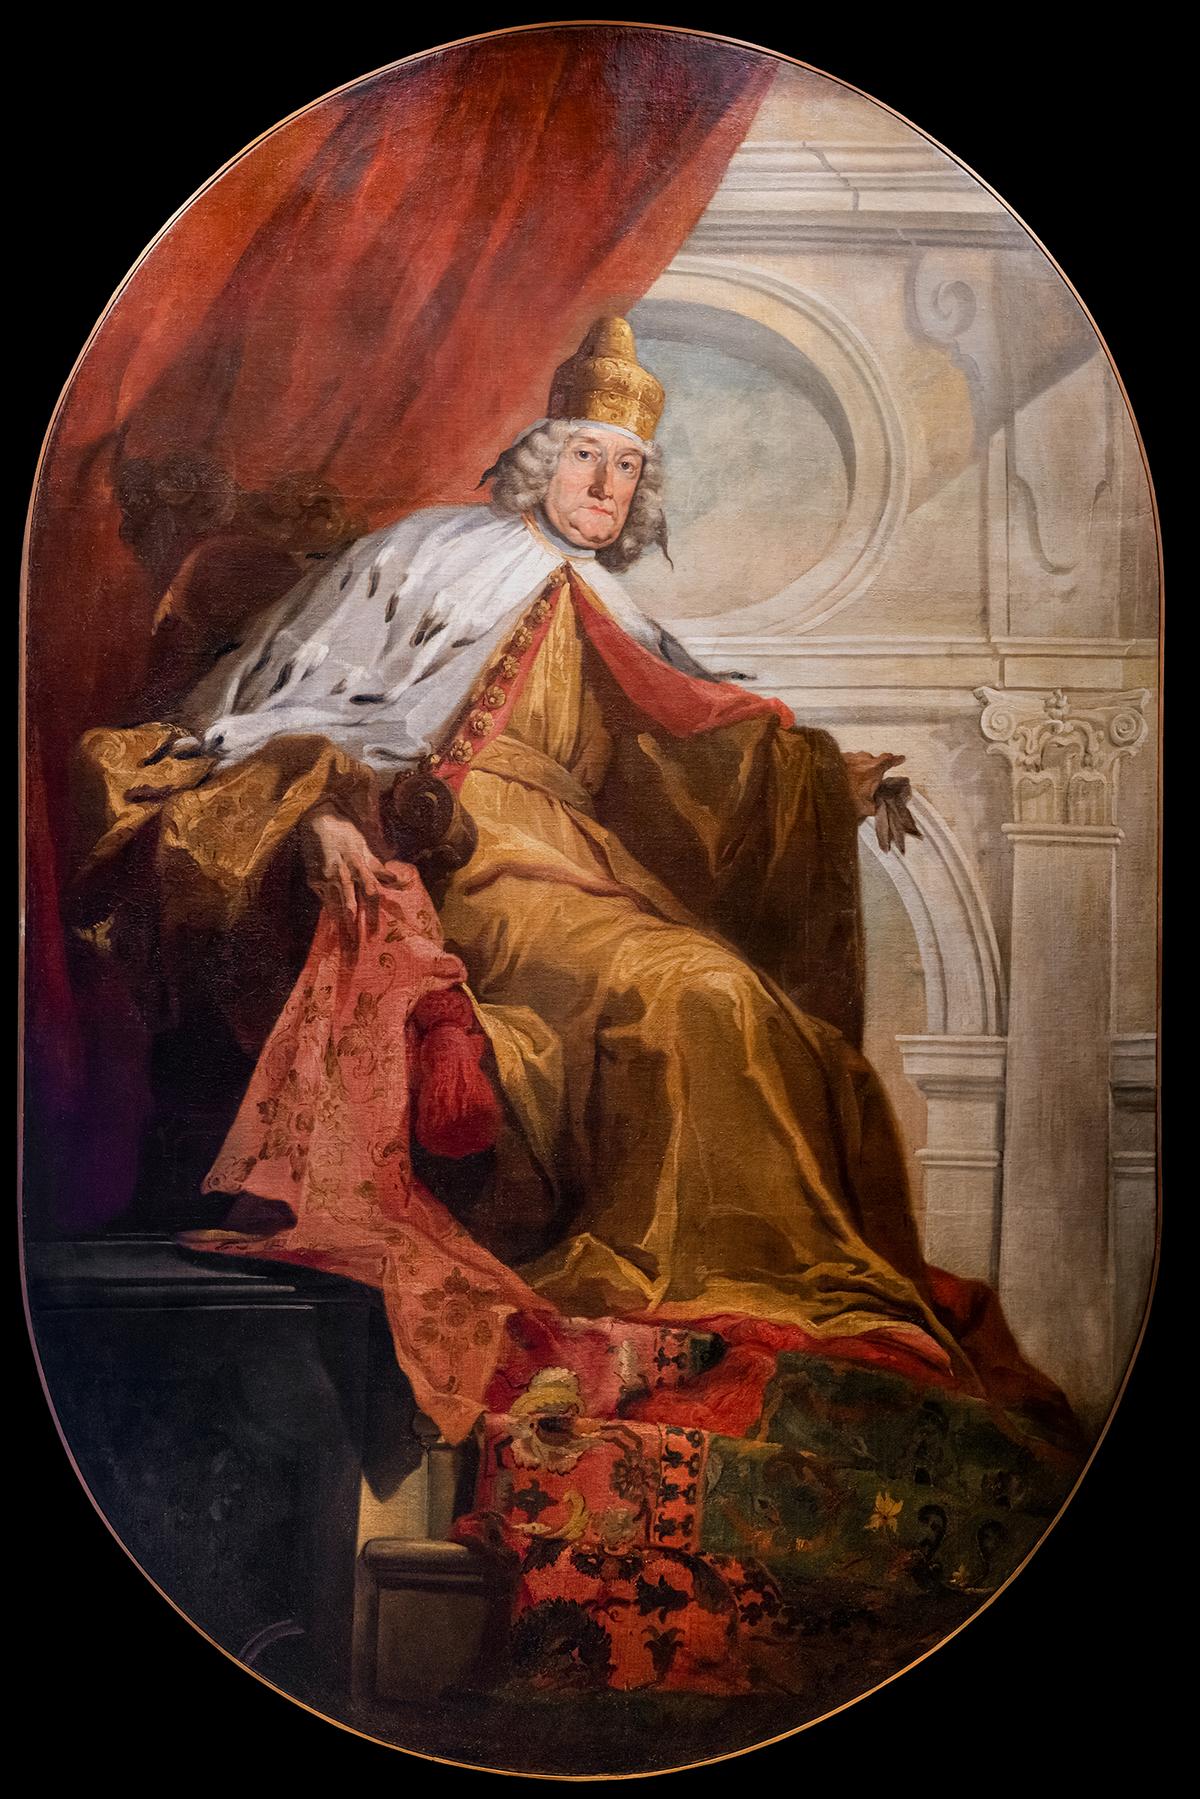 "Portrait of Doge Giovanni II Corner," early 18th centuery, by Giambattista Tiepolo. Oil on canvas. Ca' Rezzonico (Museum of 18th-century Venice), Venice. (<a href="https://commons.wikimedia.org/wiki/File:Ca%27_Rezzonico_-_Ritratto_del_doge_Giovanni_II_Corner_-_Giambattista_Tiepolo.jpg">Didier Descouens</a>/<a href="https://creativecommons.org/licenses/by-sa/4.0/deed.en">CC BY-SA 4.0 DEED</a>)